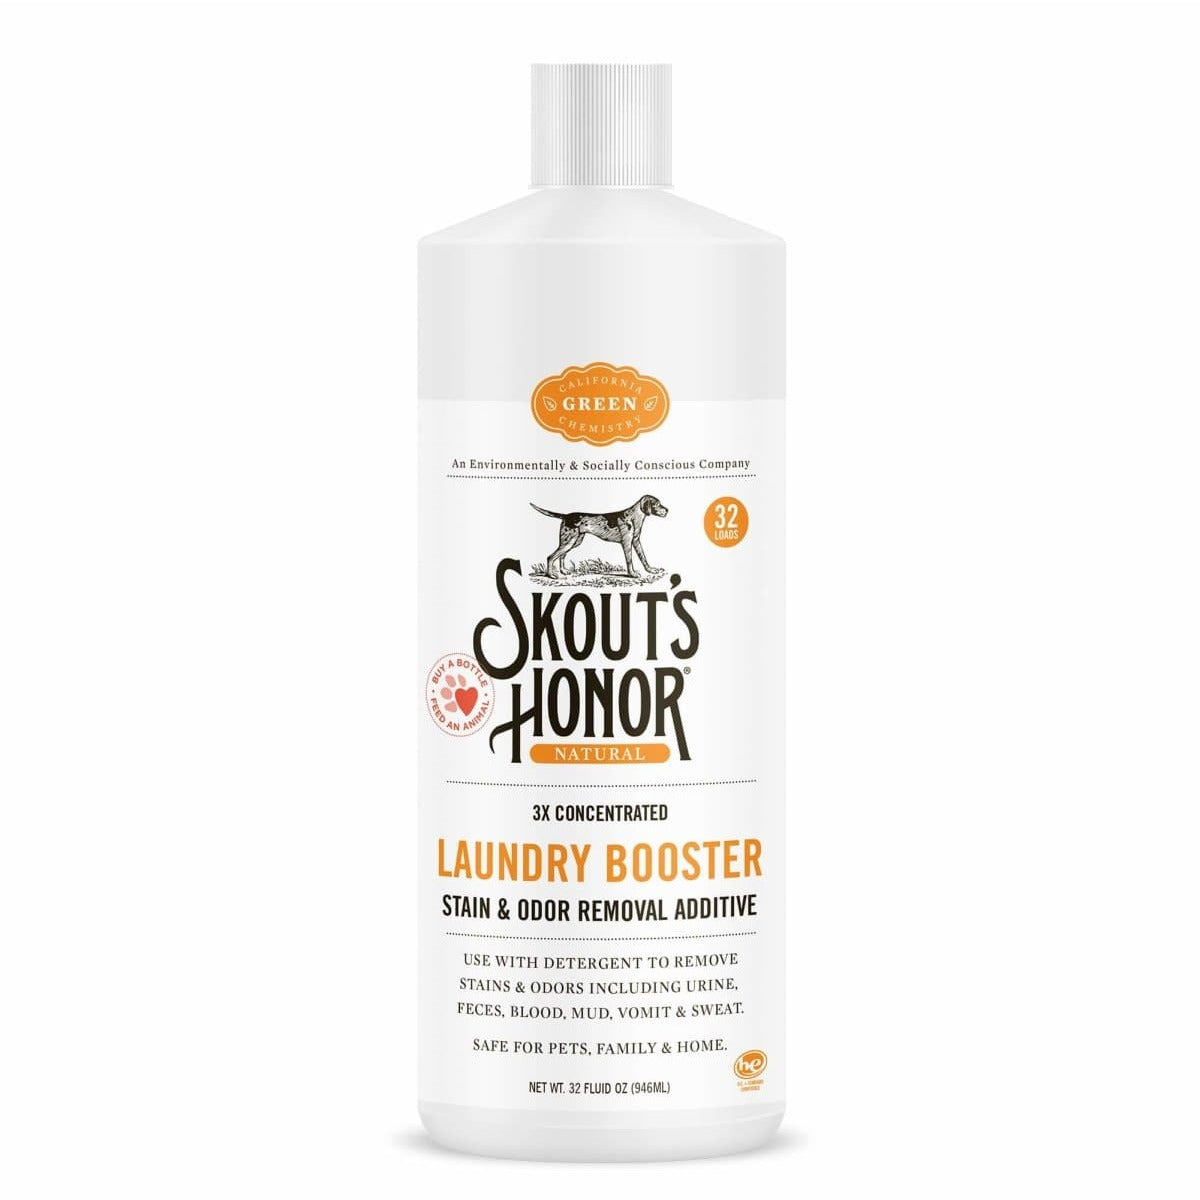 Skout's Honor Laundry Booster - Stain & Odor Removal Additive